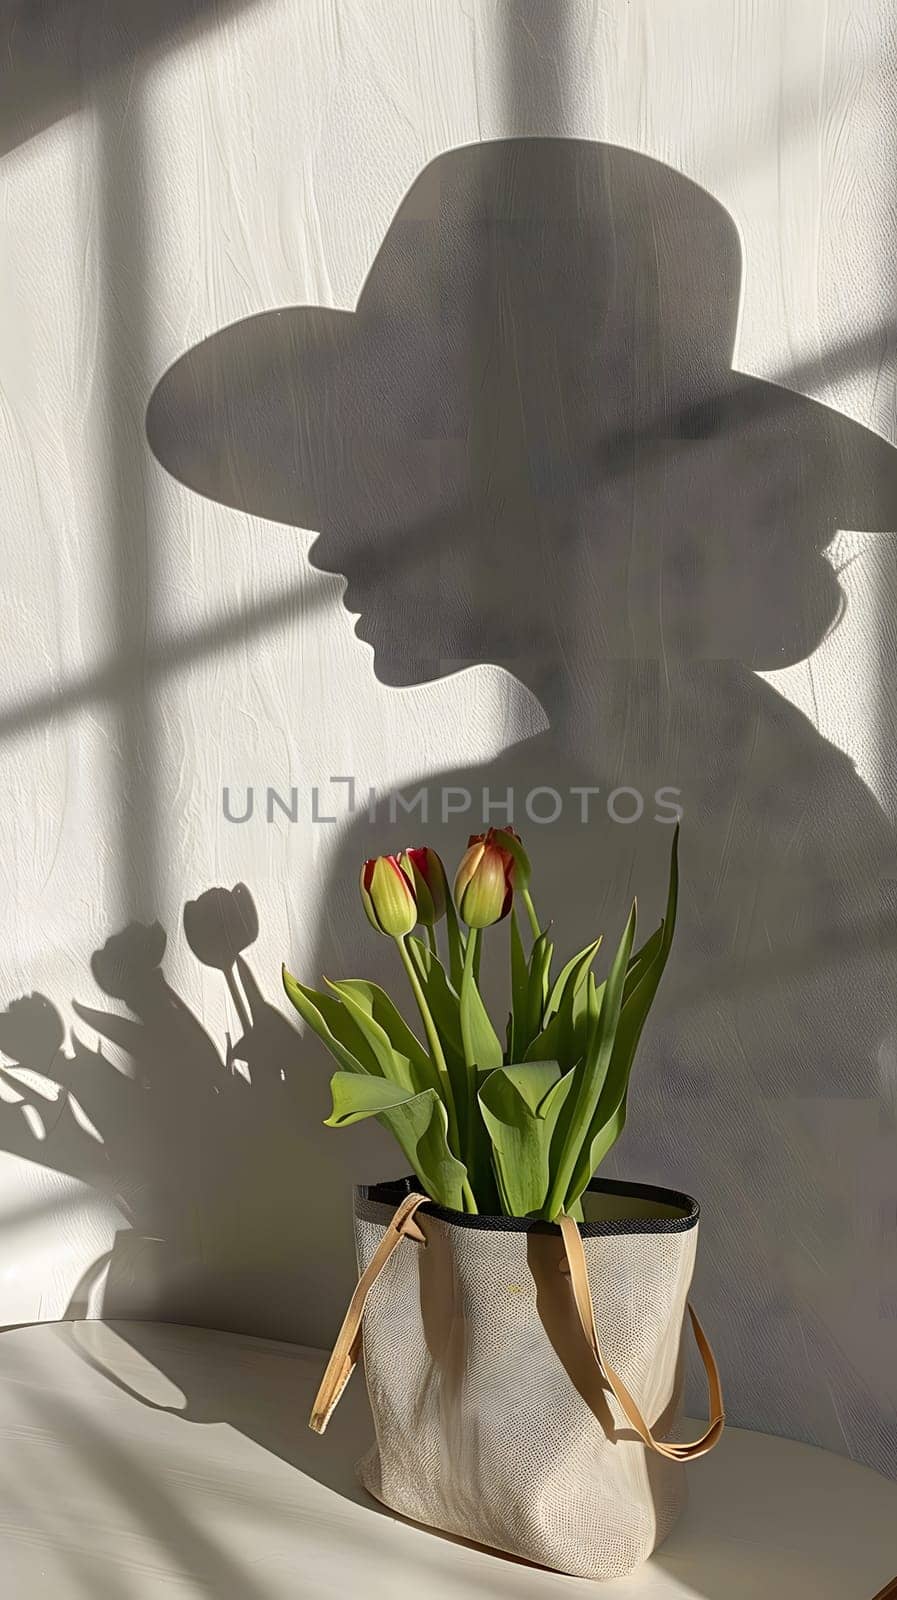 A womans shadow wearing a hat is projected onto a wall beside a houseplant in a flowerpot, creating an artful display of light and nature